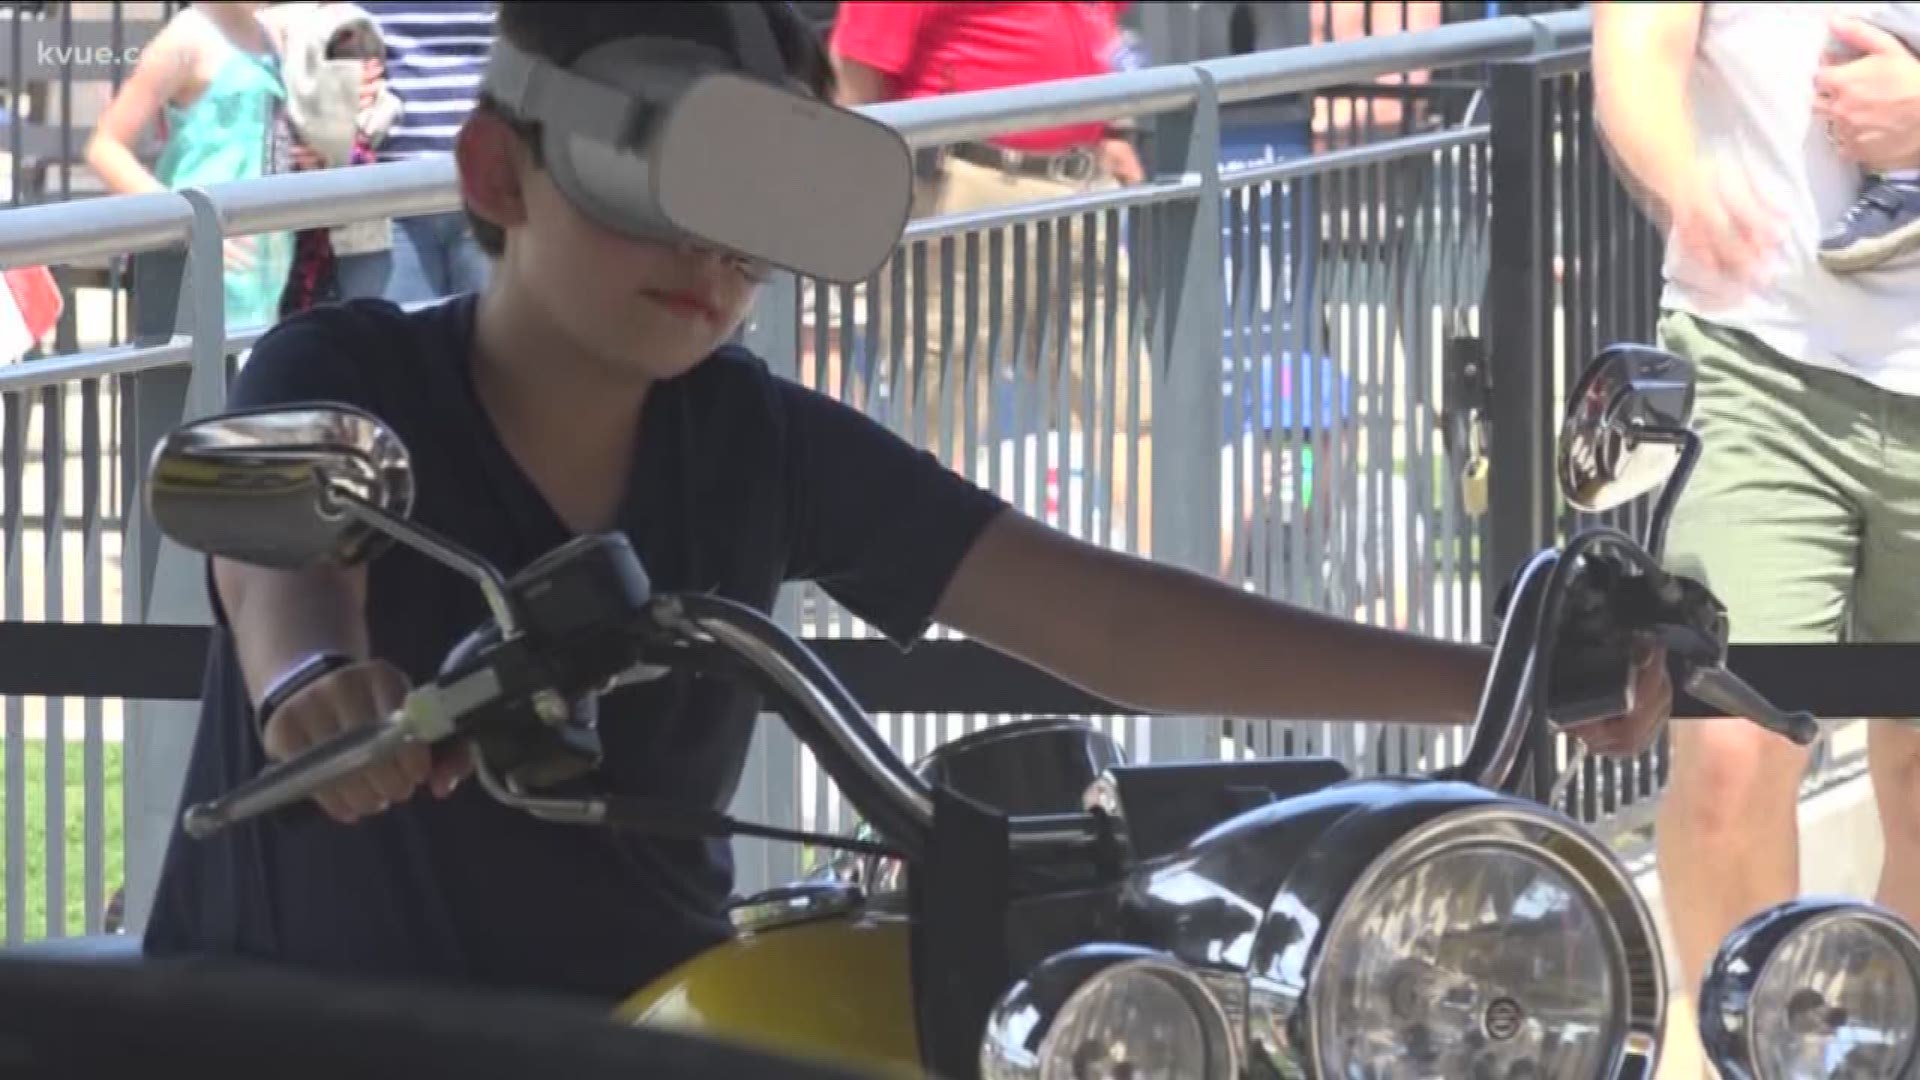 TxDOT hosted a virtual reality game at the Dell Diamond in Round Rock to raise driver awareness for motorcycle safety.